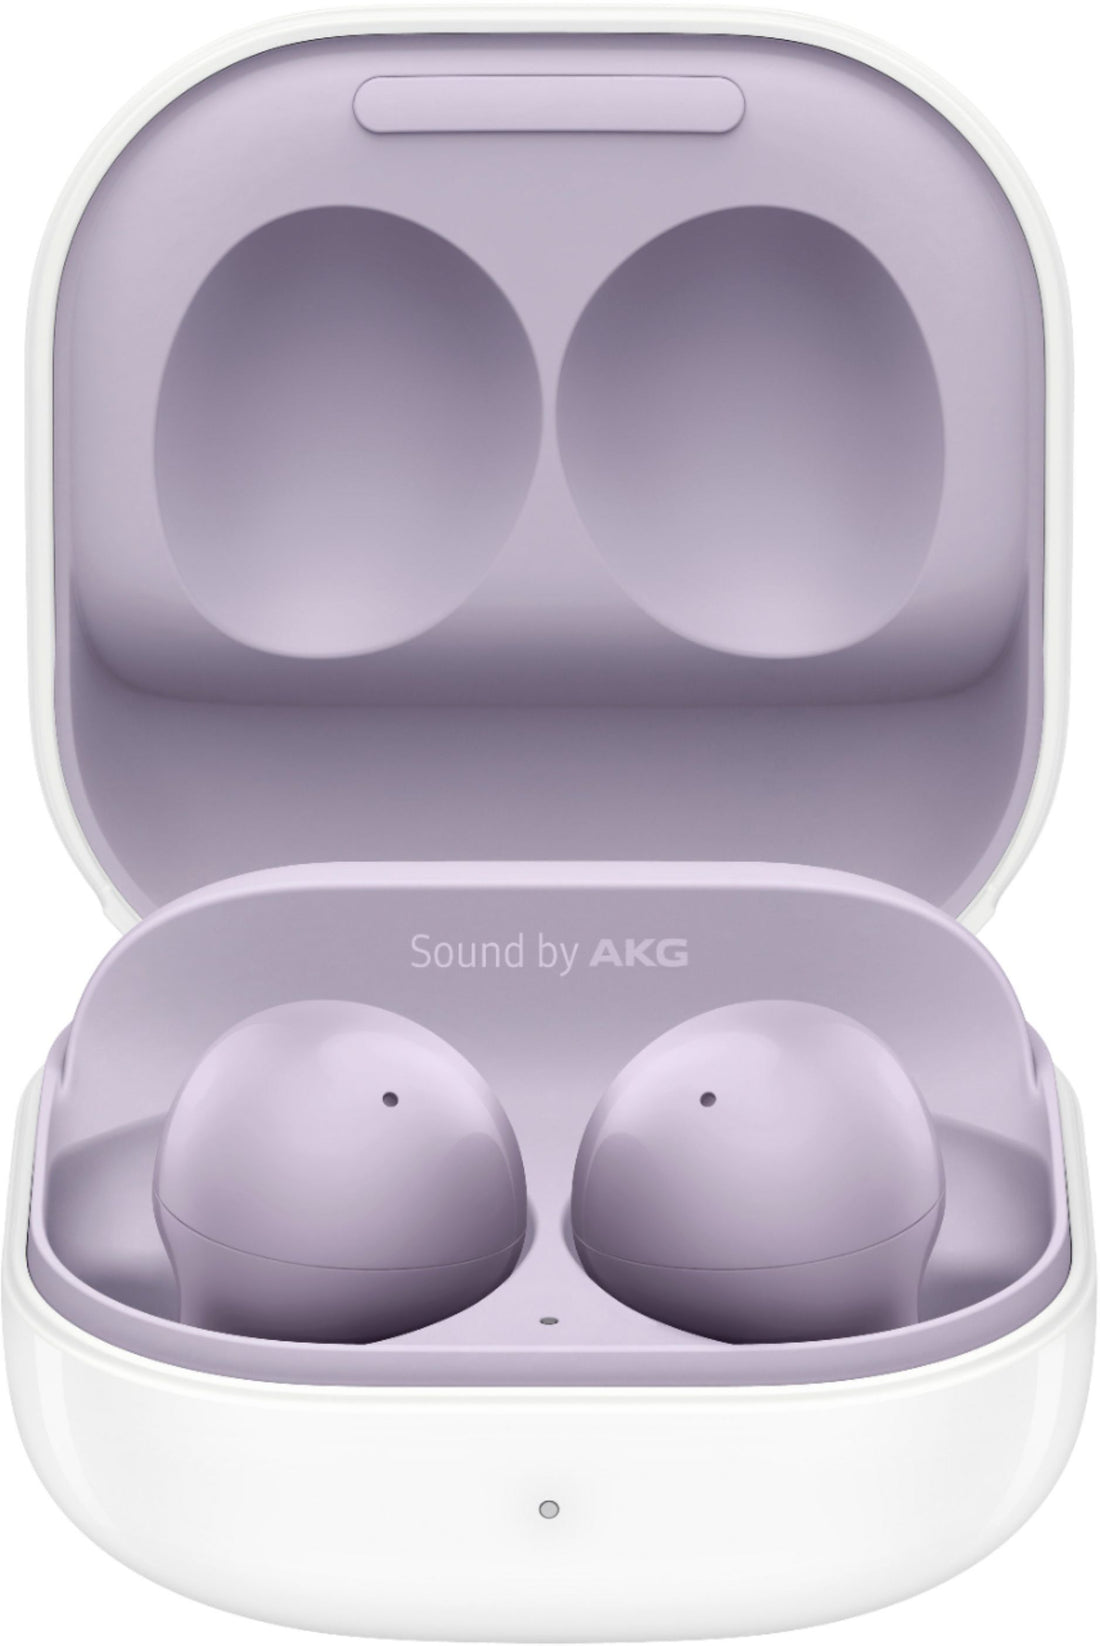 Samsung Galaxy Buds2 Noise Cancelling In-Ear True-Wireless Earbuds - Lavender (New)